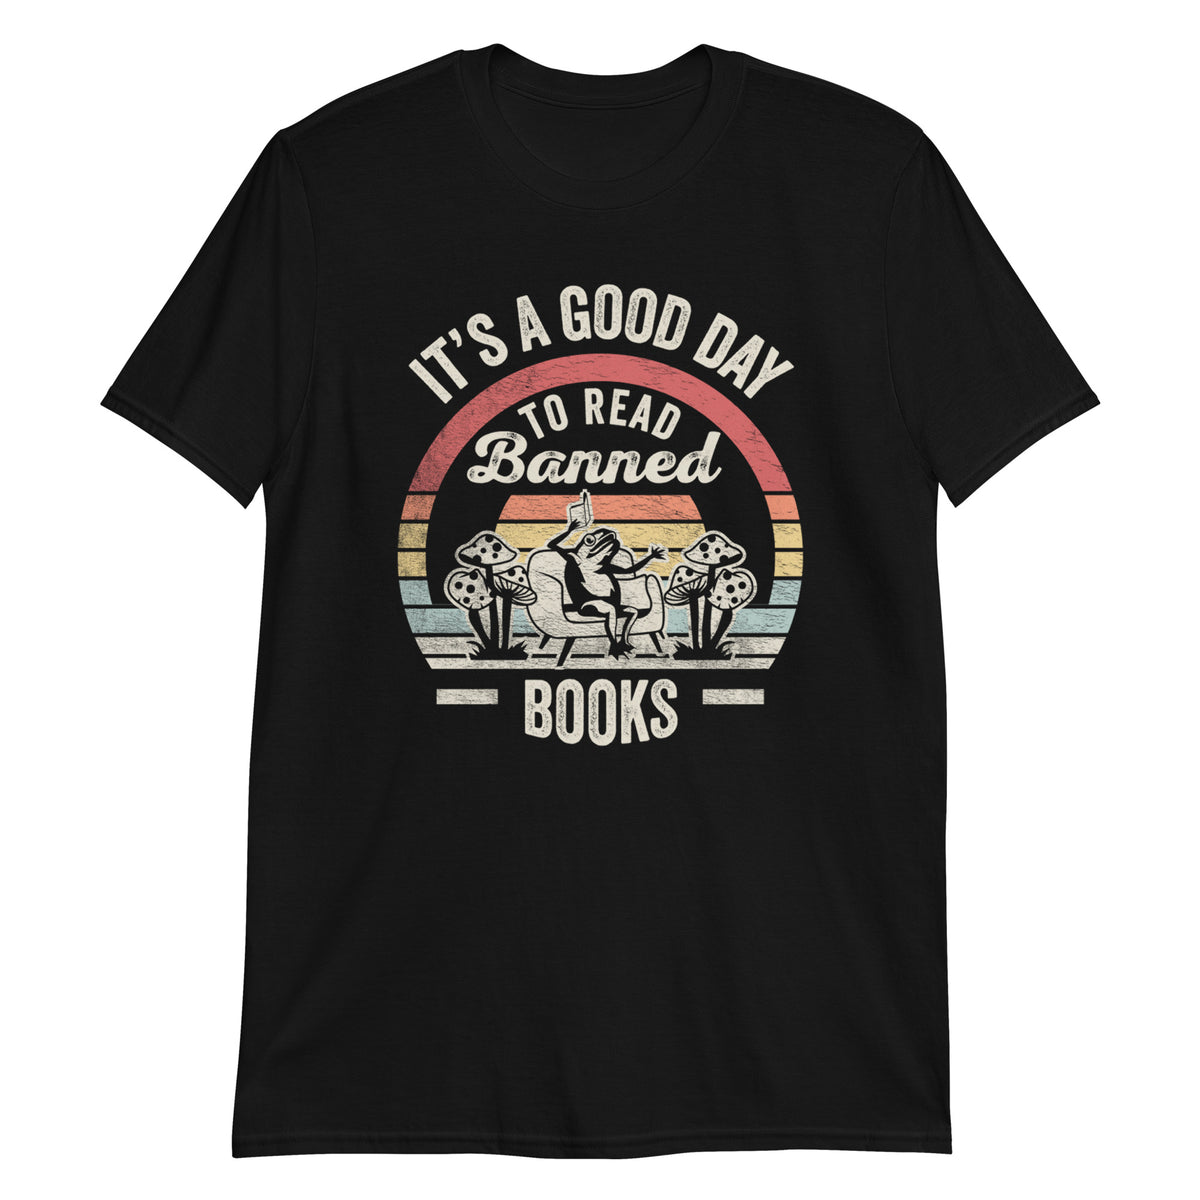 It's a Good Day to Read Banned Books T-Shirt